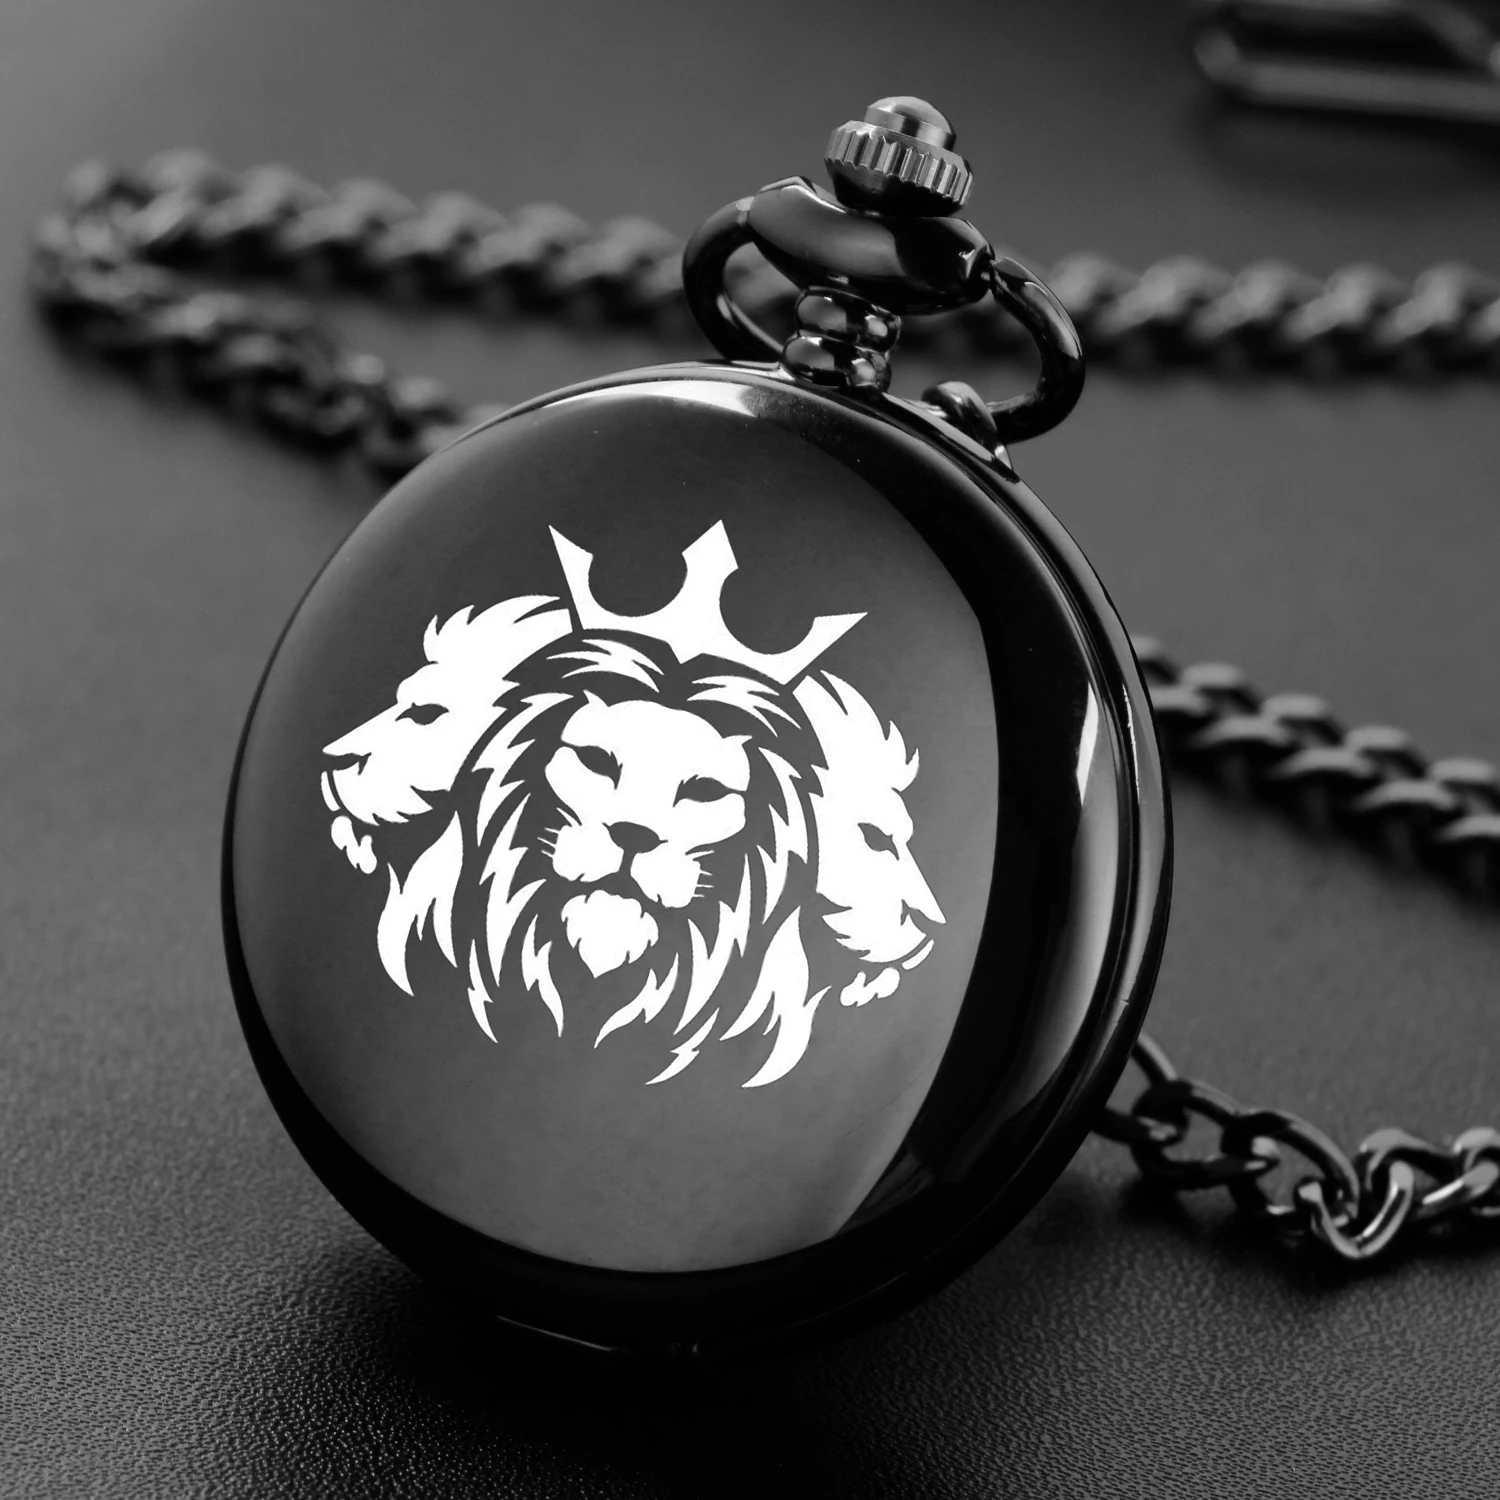 

The Lion King cool fashion design carving english alphabet face pocket watch a belt chain Black quartz watch perfect gifts